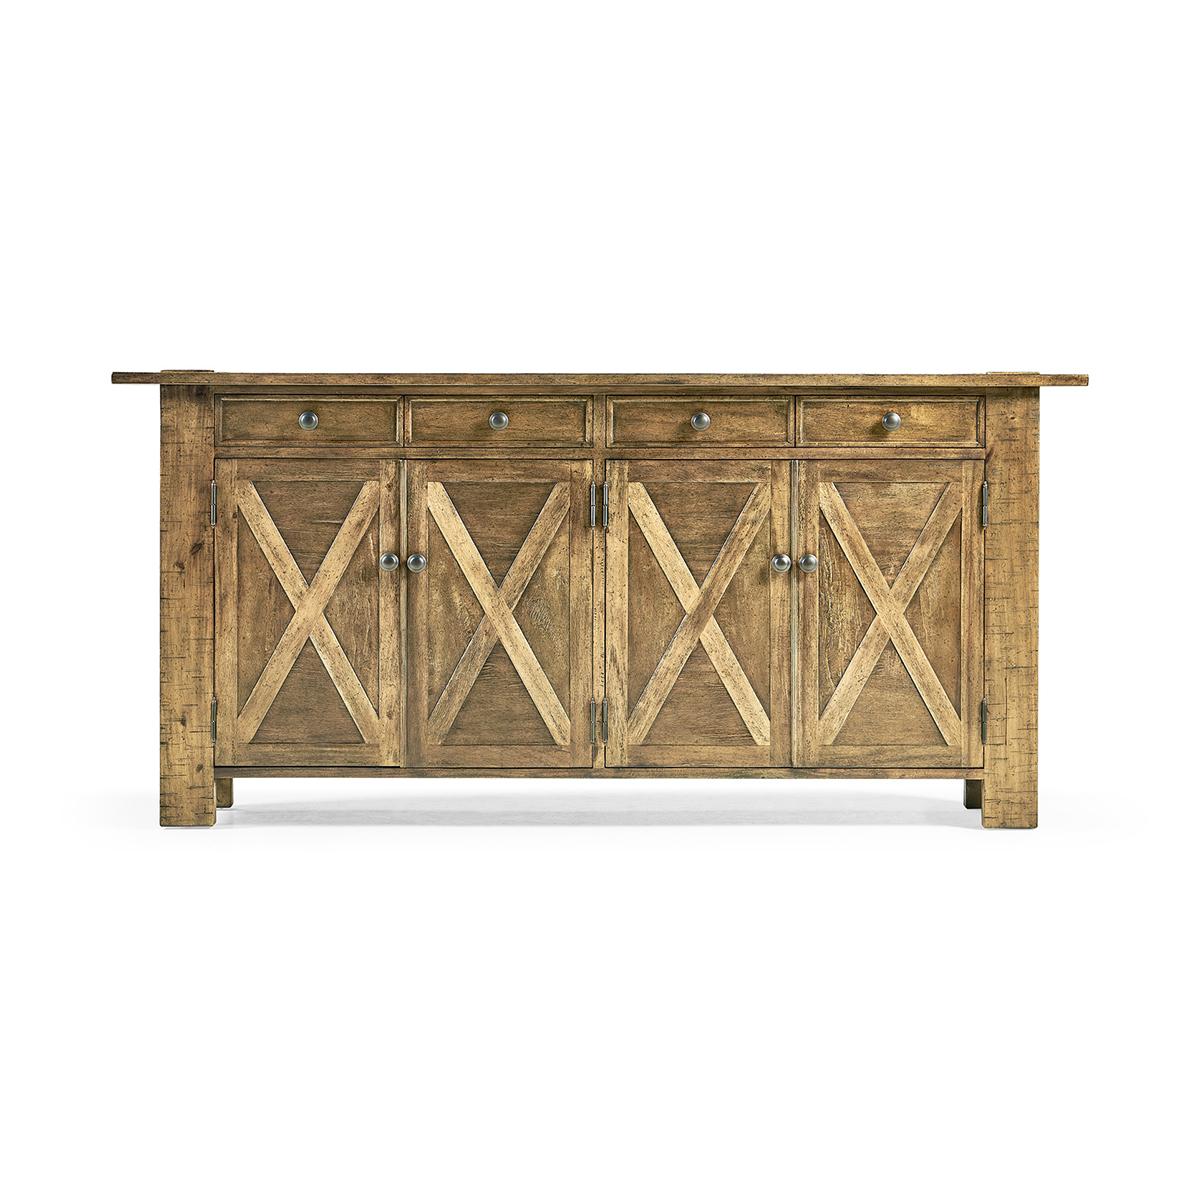 Narrow country credenza with a medium driftwood finish, with paneled details showing exposed saw marks with four doors, shelves within, and four drawers. 

Dimensions: 84